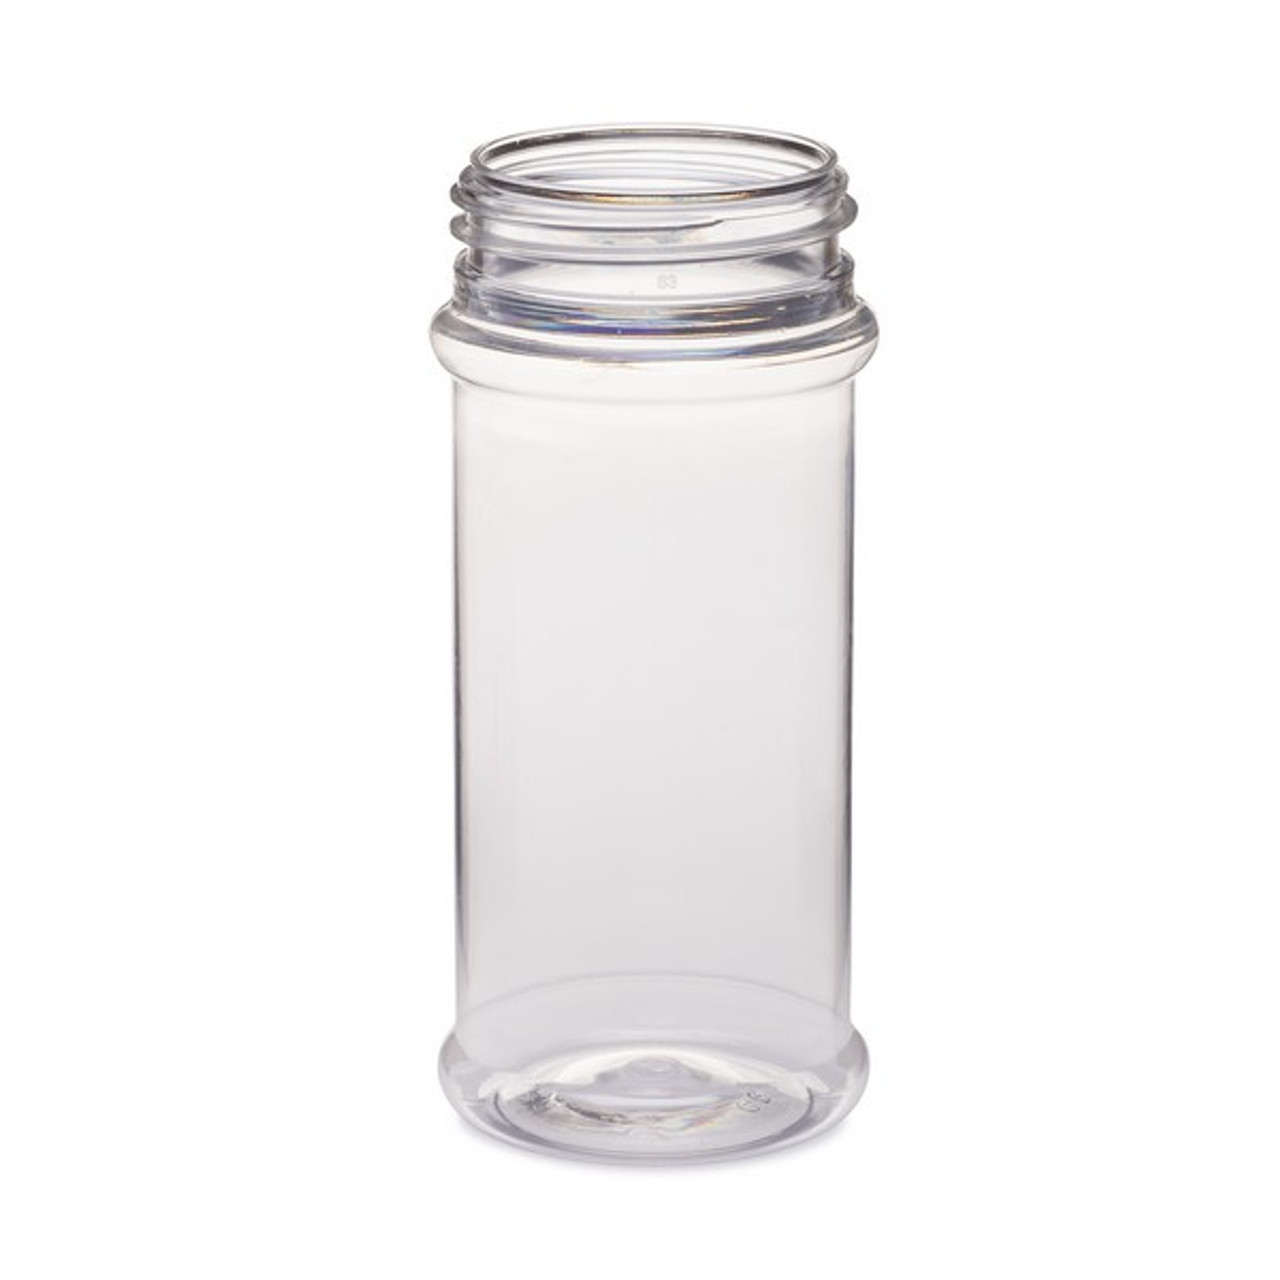 8 oz Clear Pet Plastic Spice Jars (Cap Not Included) - Clear 53-485